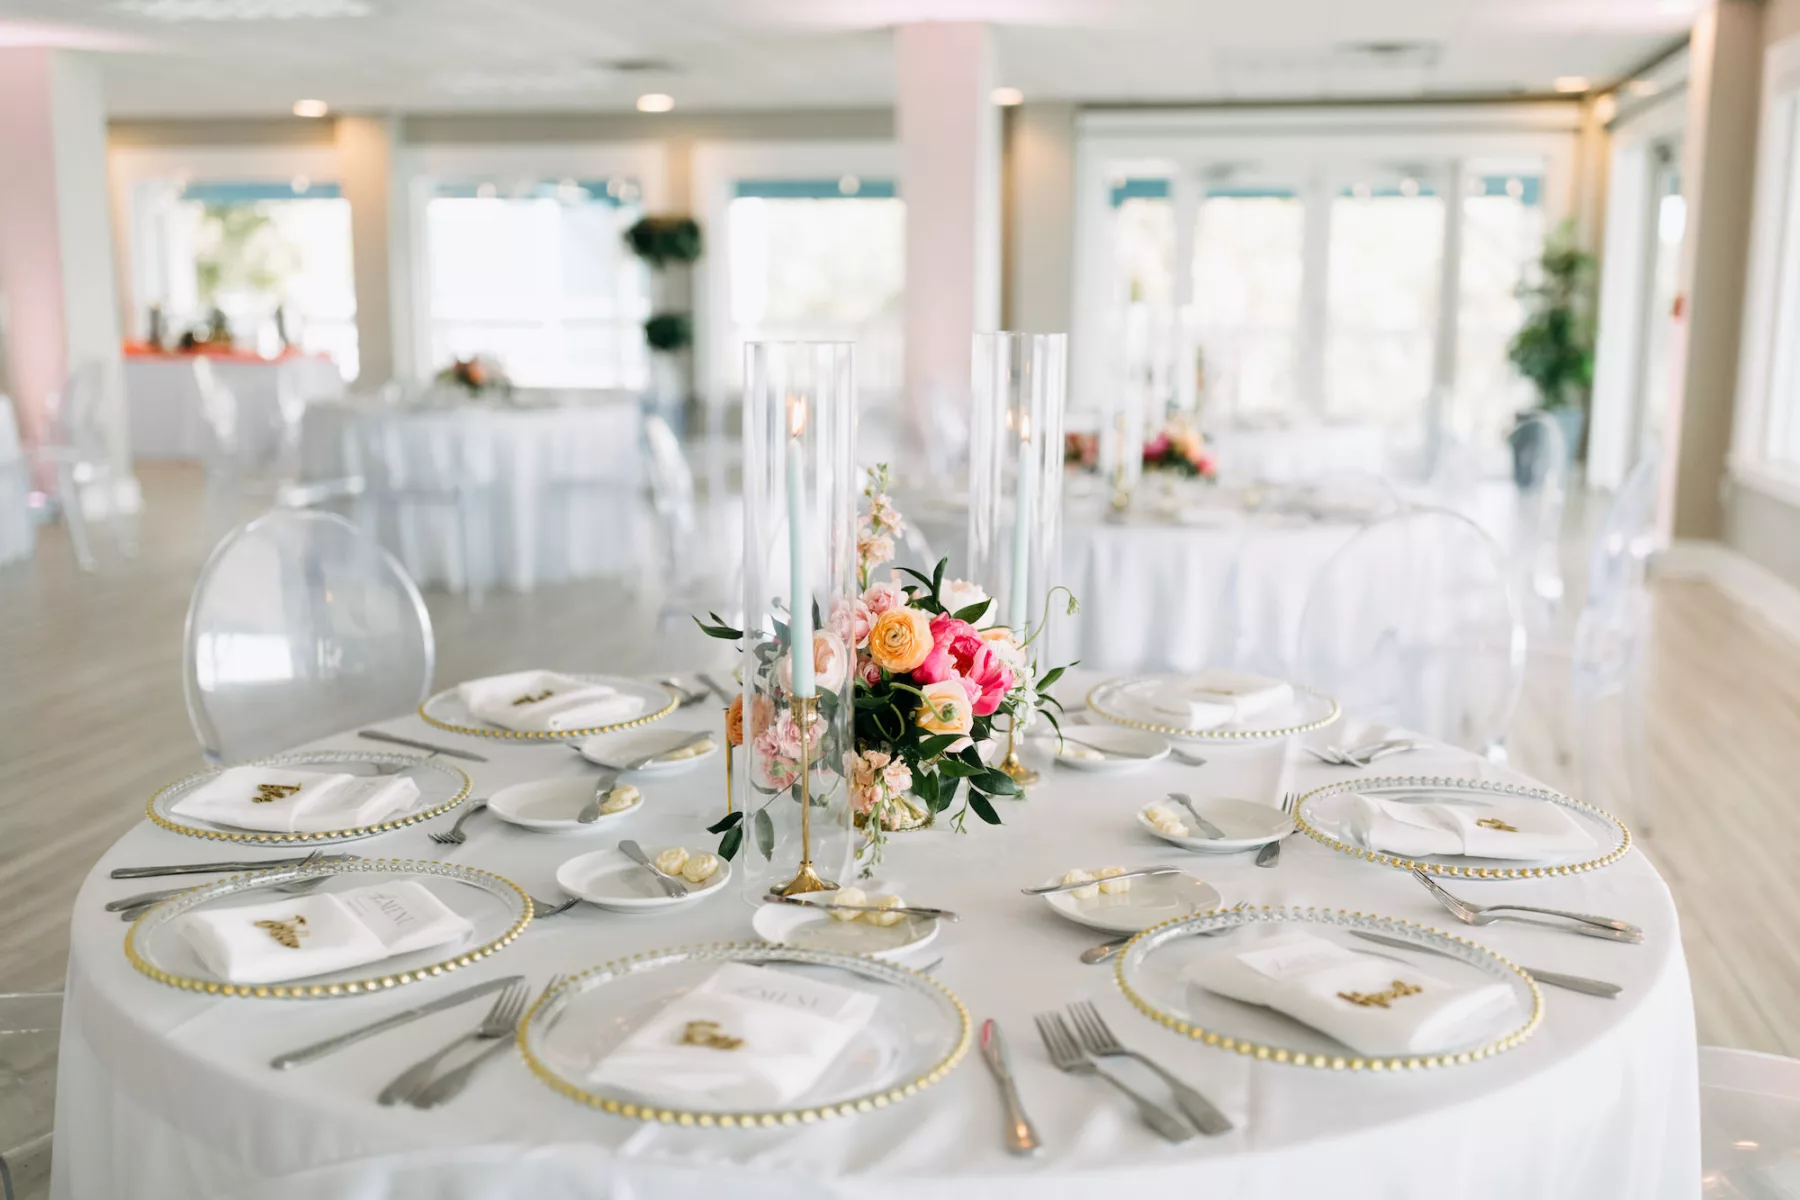 Classic White and Gold Wedding Reception Tablescape with Beaded Chargers | Orange Ranunculus, Pink Peony, Roses, and Greenery Summer Wedding Reception Centerpiece Decor Inspiration | Tampa Bay Florist Beneva Flowers